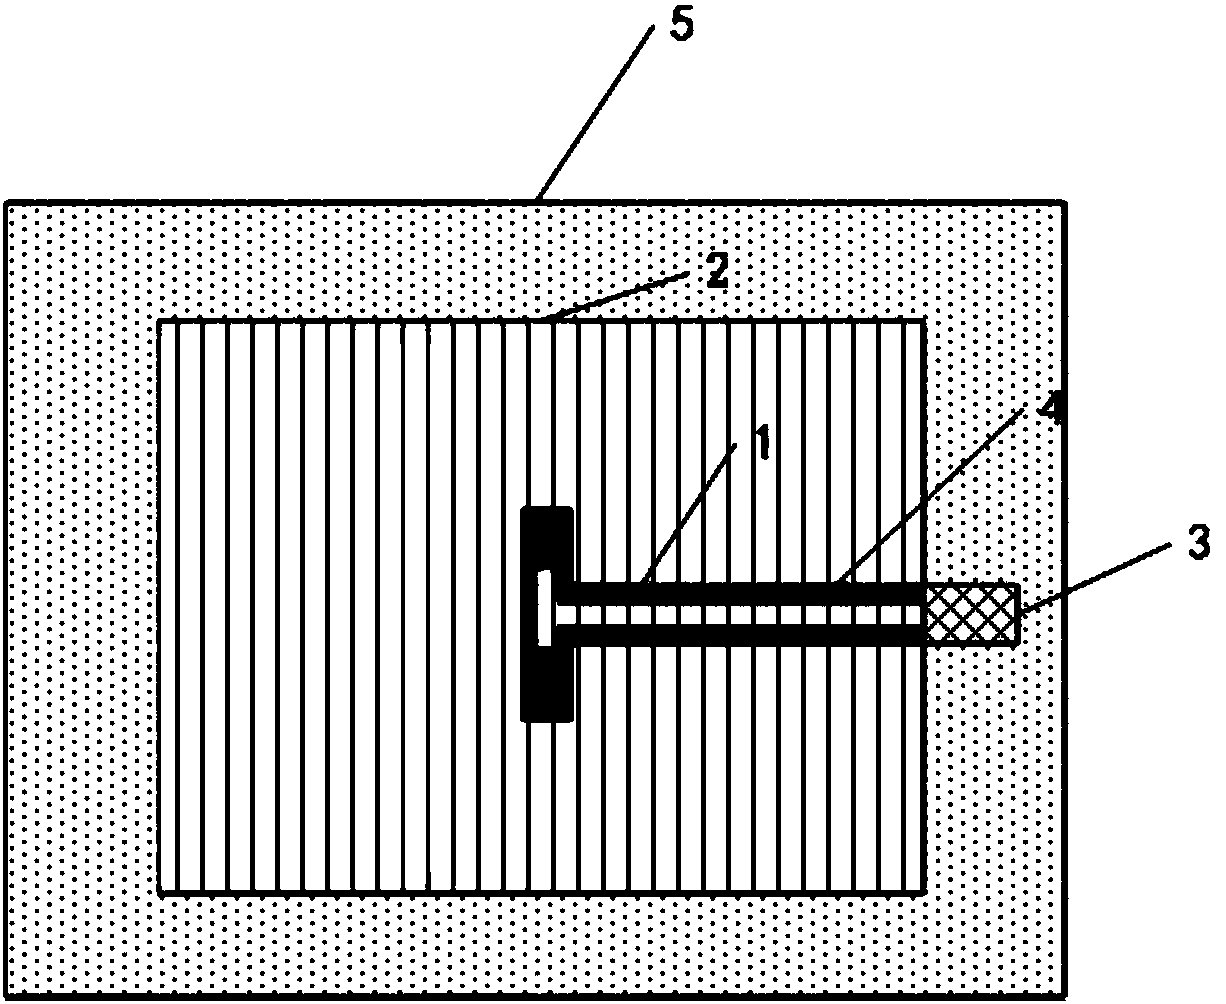 Road-surface microwave deicing method based on high-dielectric-constant material covering